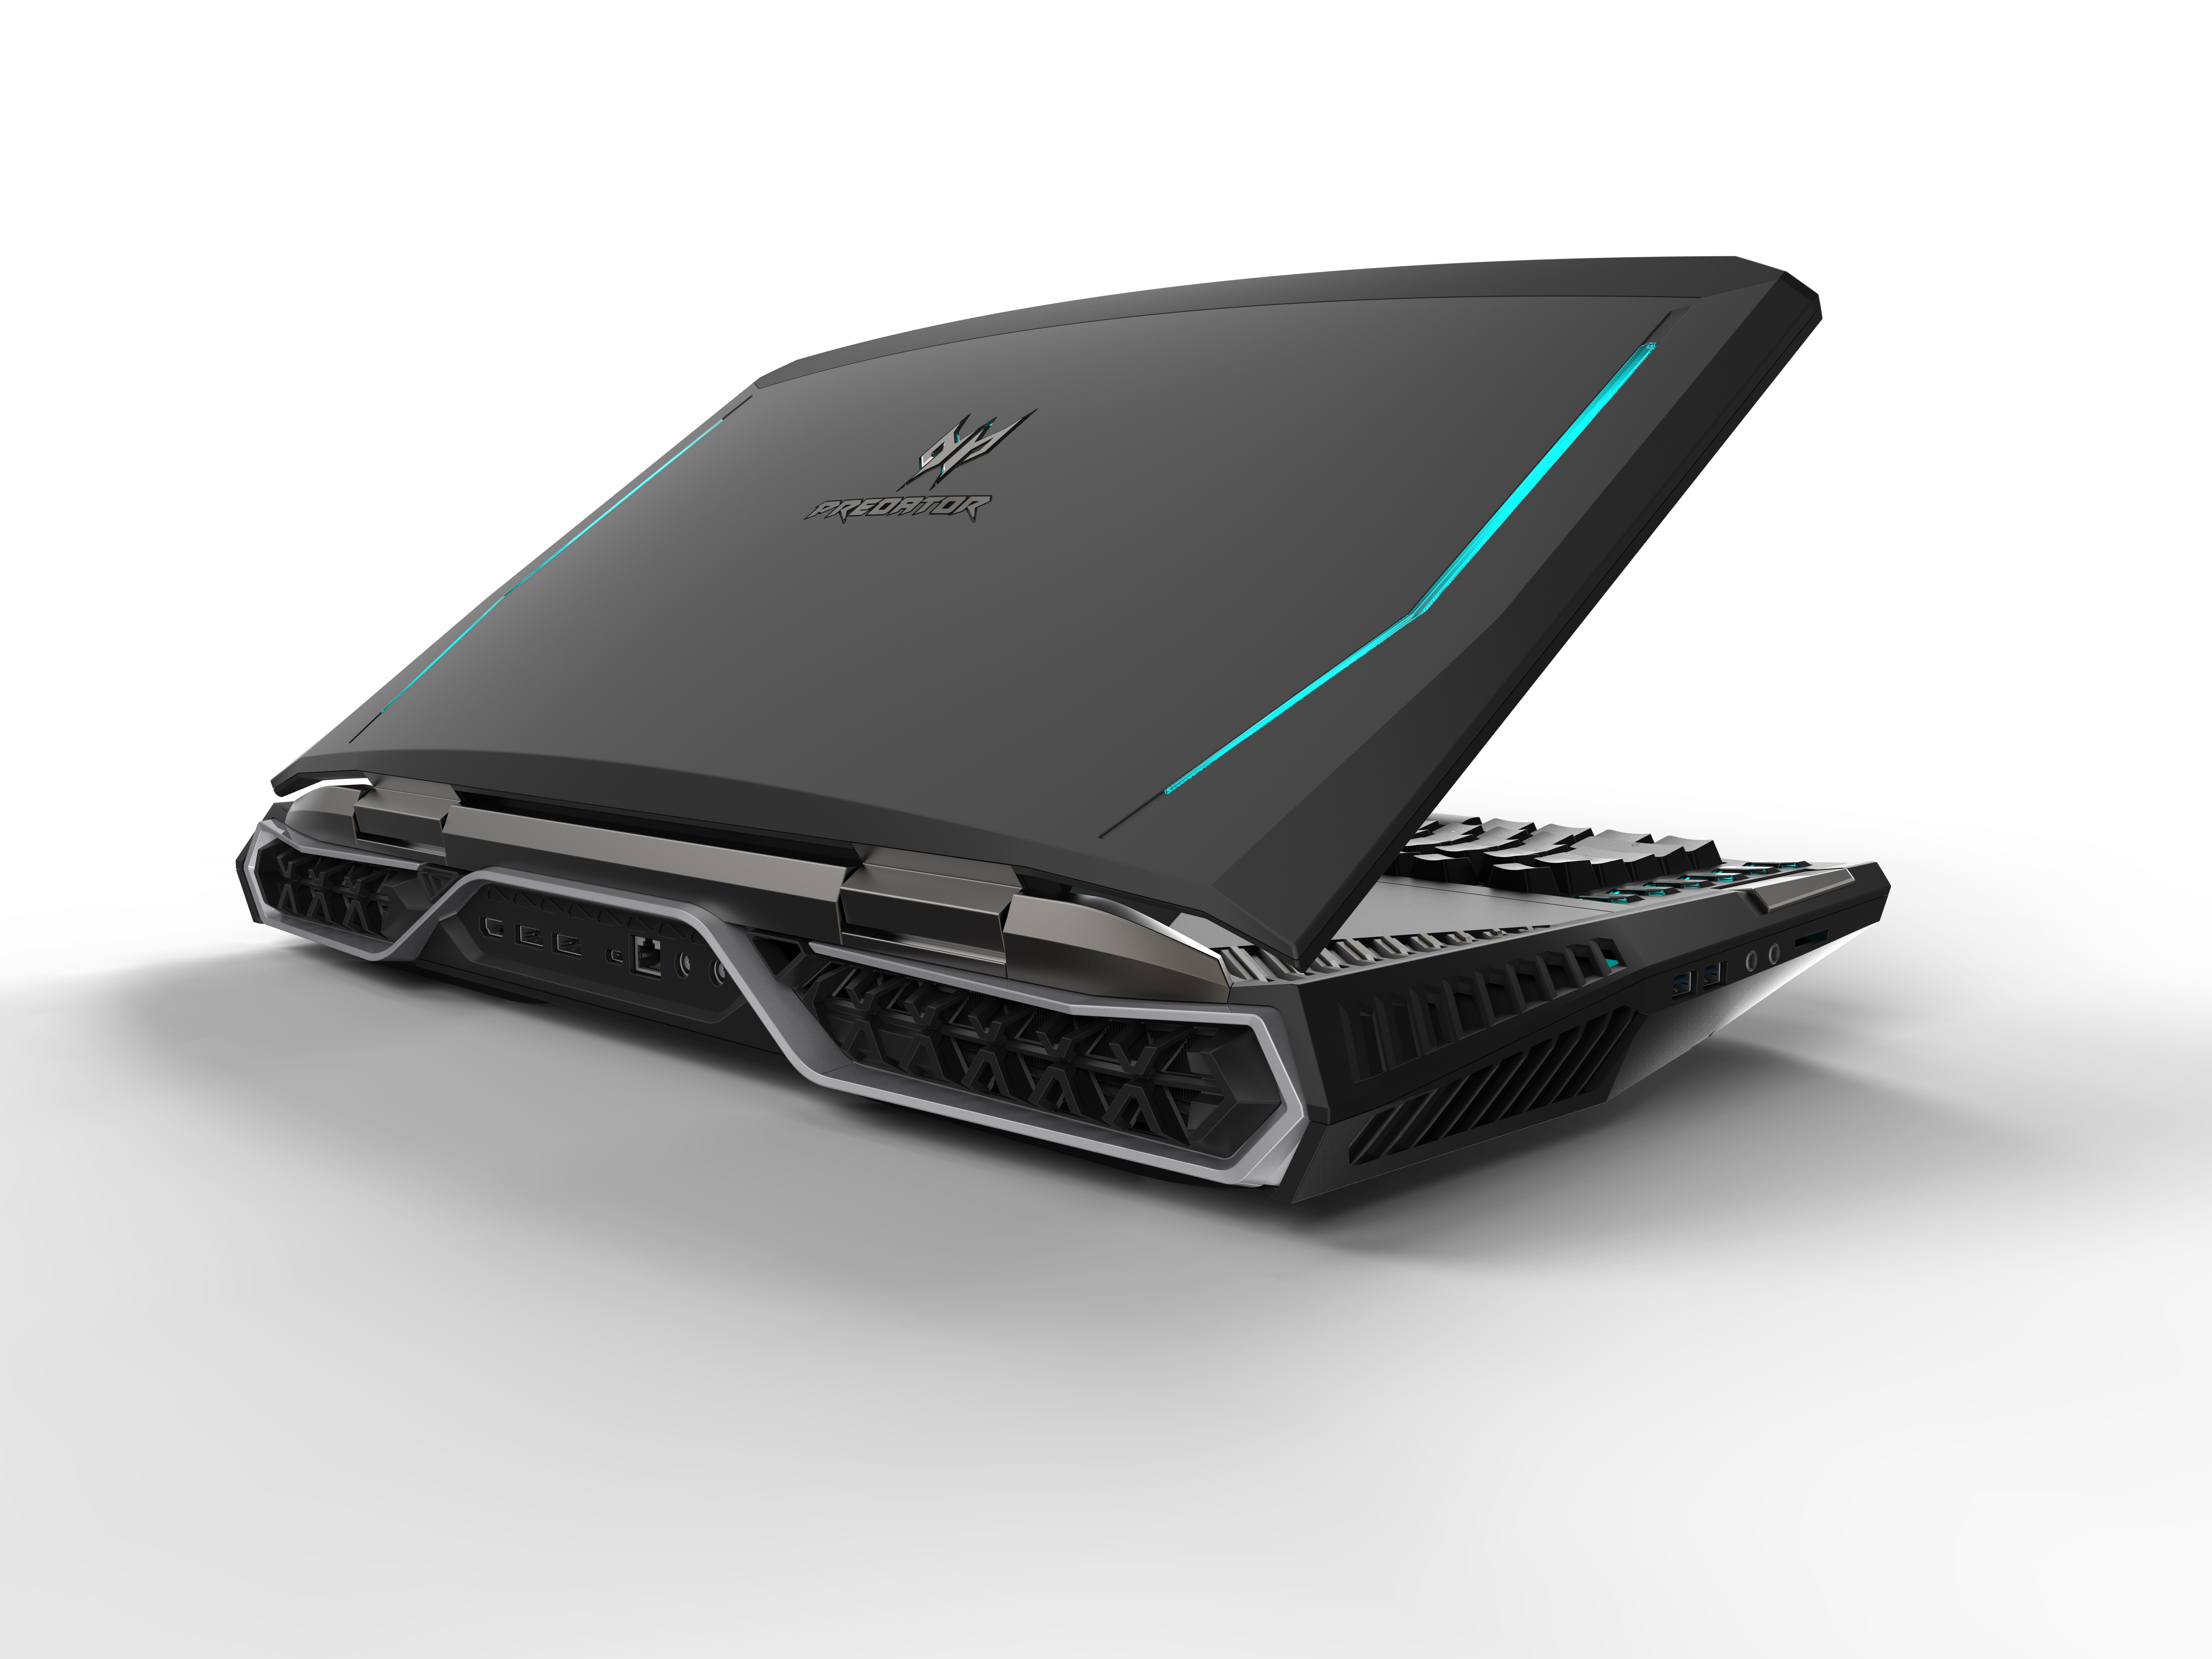 Acer's monster laptop is the ultimate Windows 10 portable gaming machine